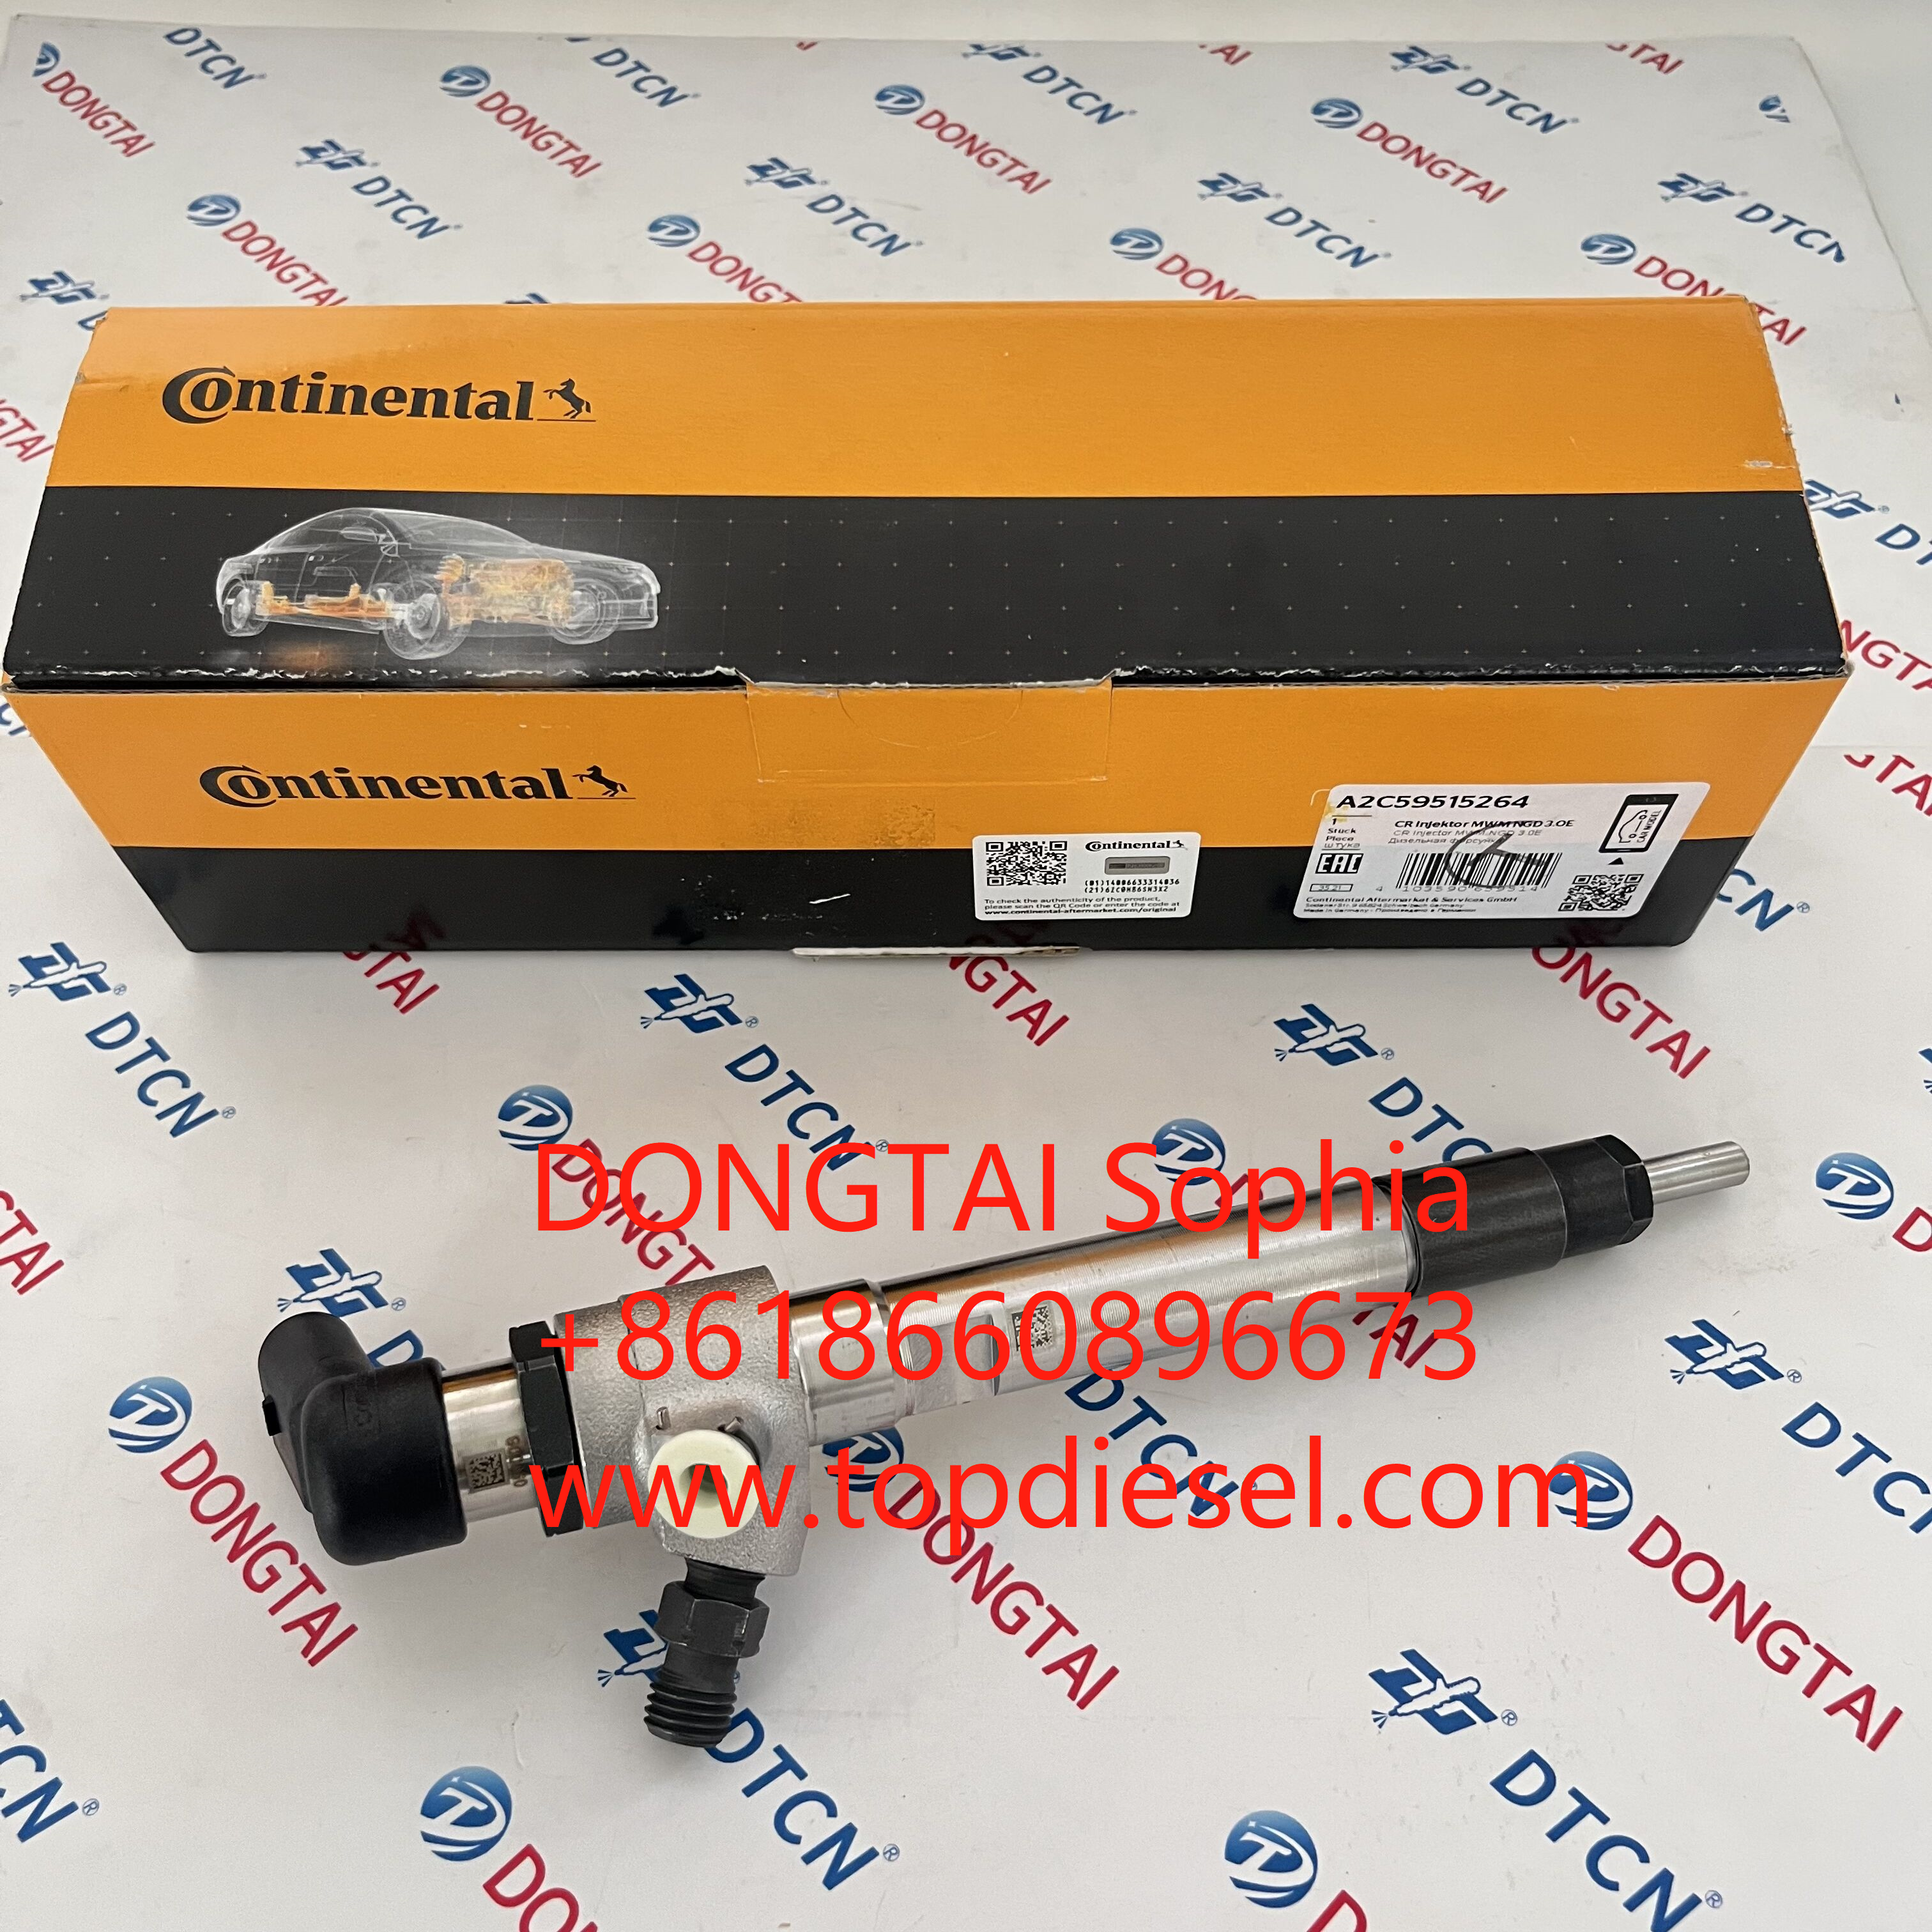 Hot-selling Heui Pump Shaft - SIEMENS VDO Common Rail Injector A2C59515264=77550 For FORD Original   – Dongtai